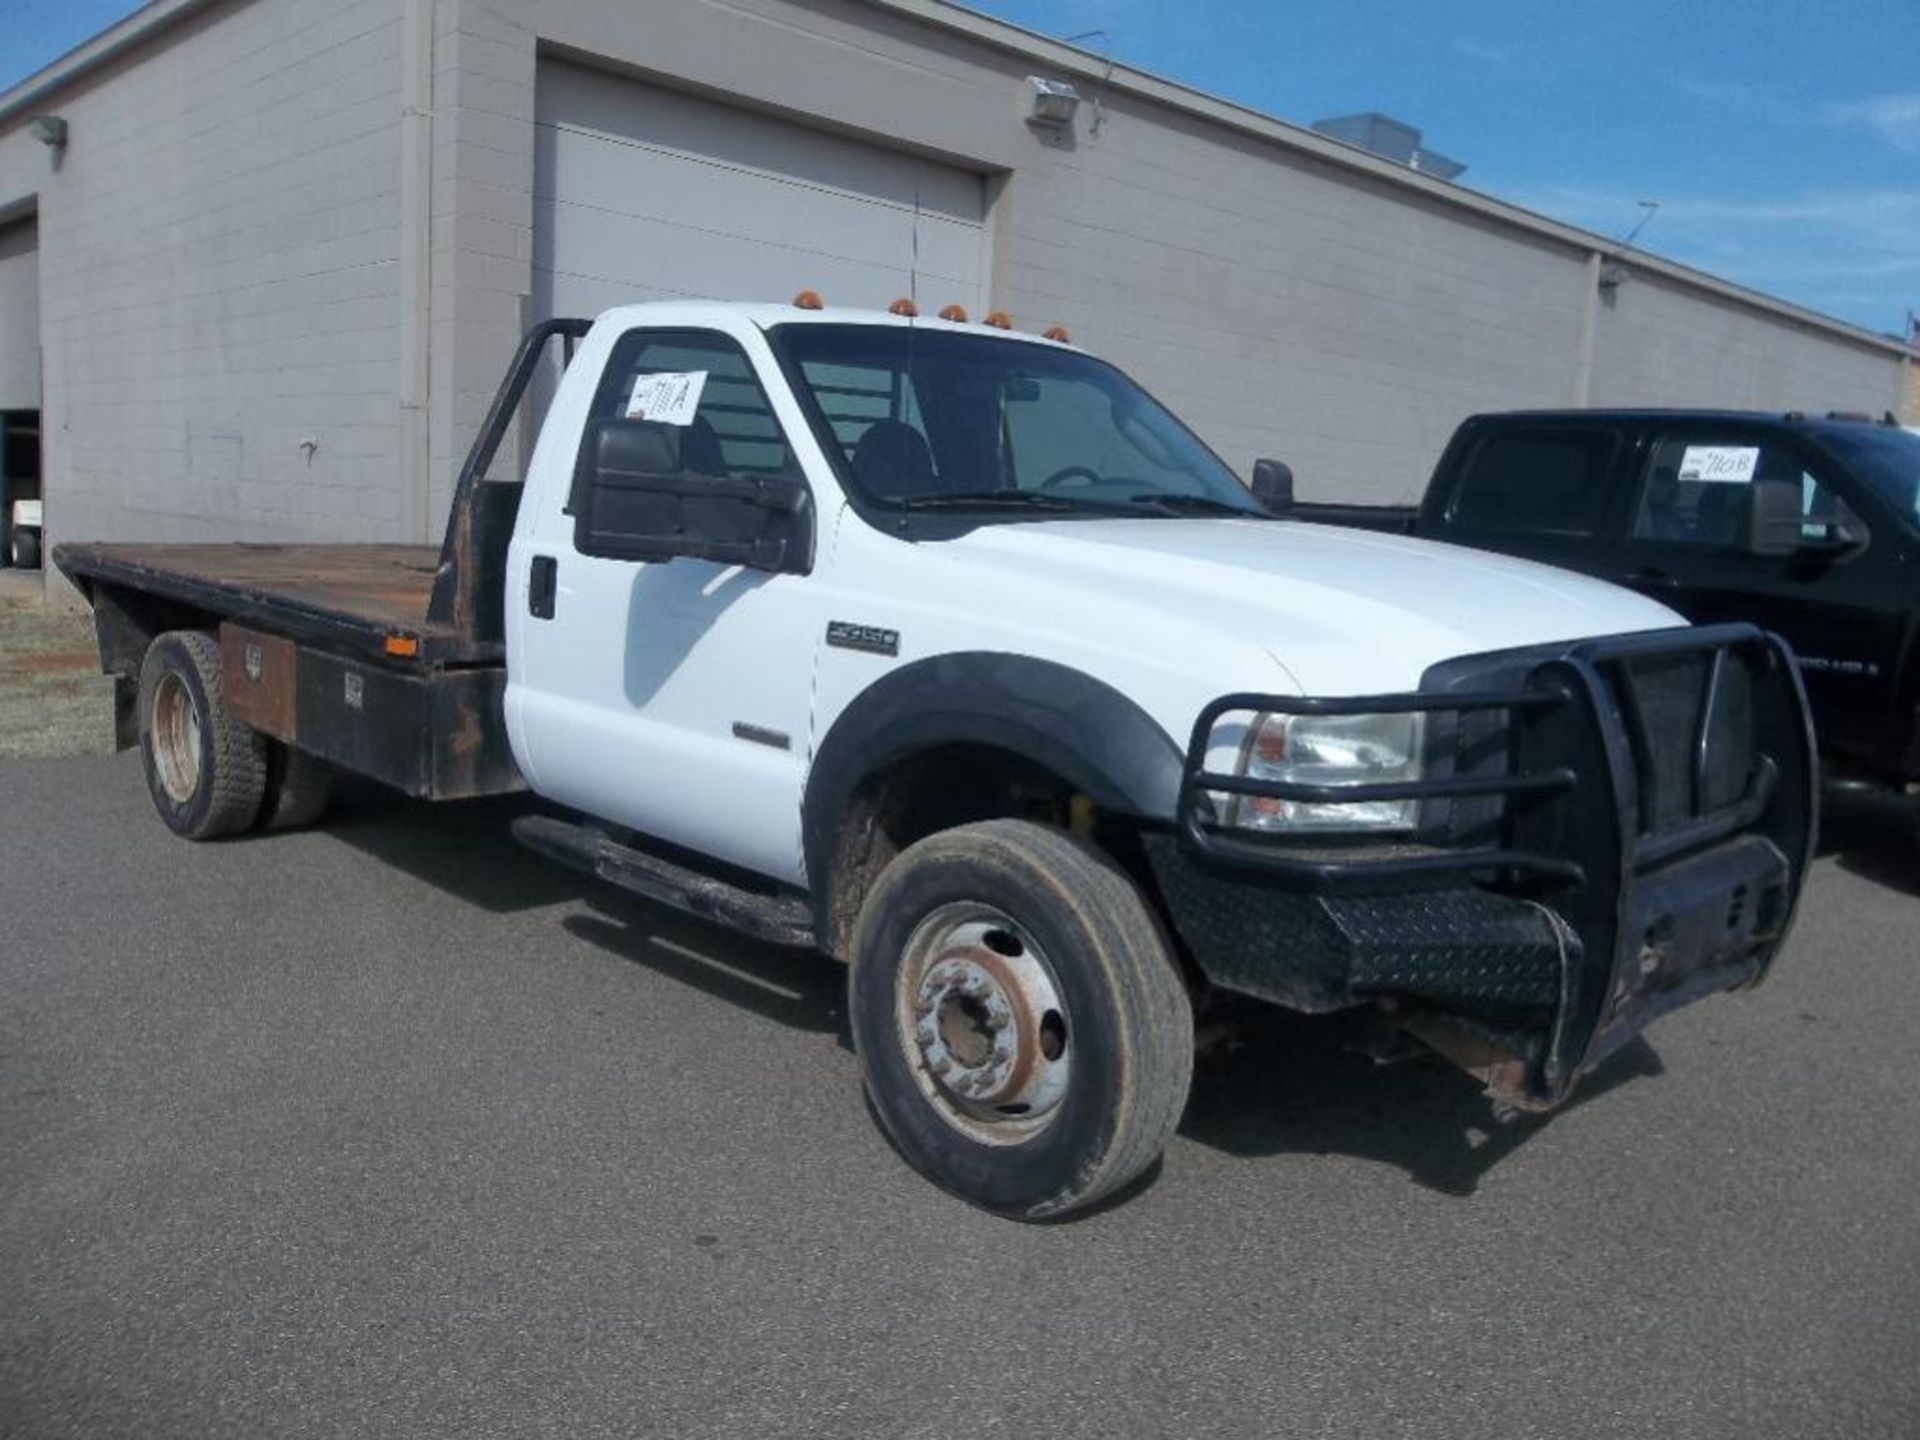 2007 Ford F450 Flatbed Truck s/n 1fdx46p97ea94803, v8 diesel eng, auto trans, od reads 158482 miles - Image 7 of 11